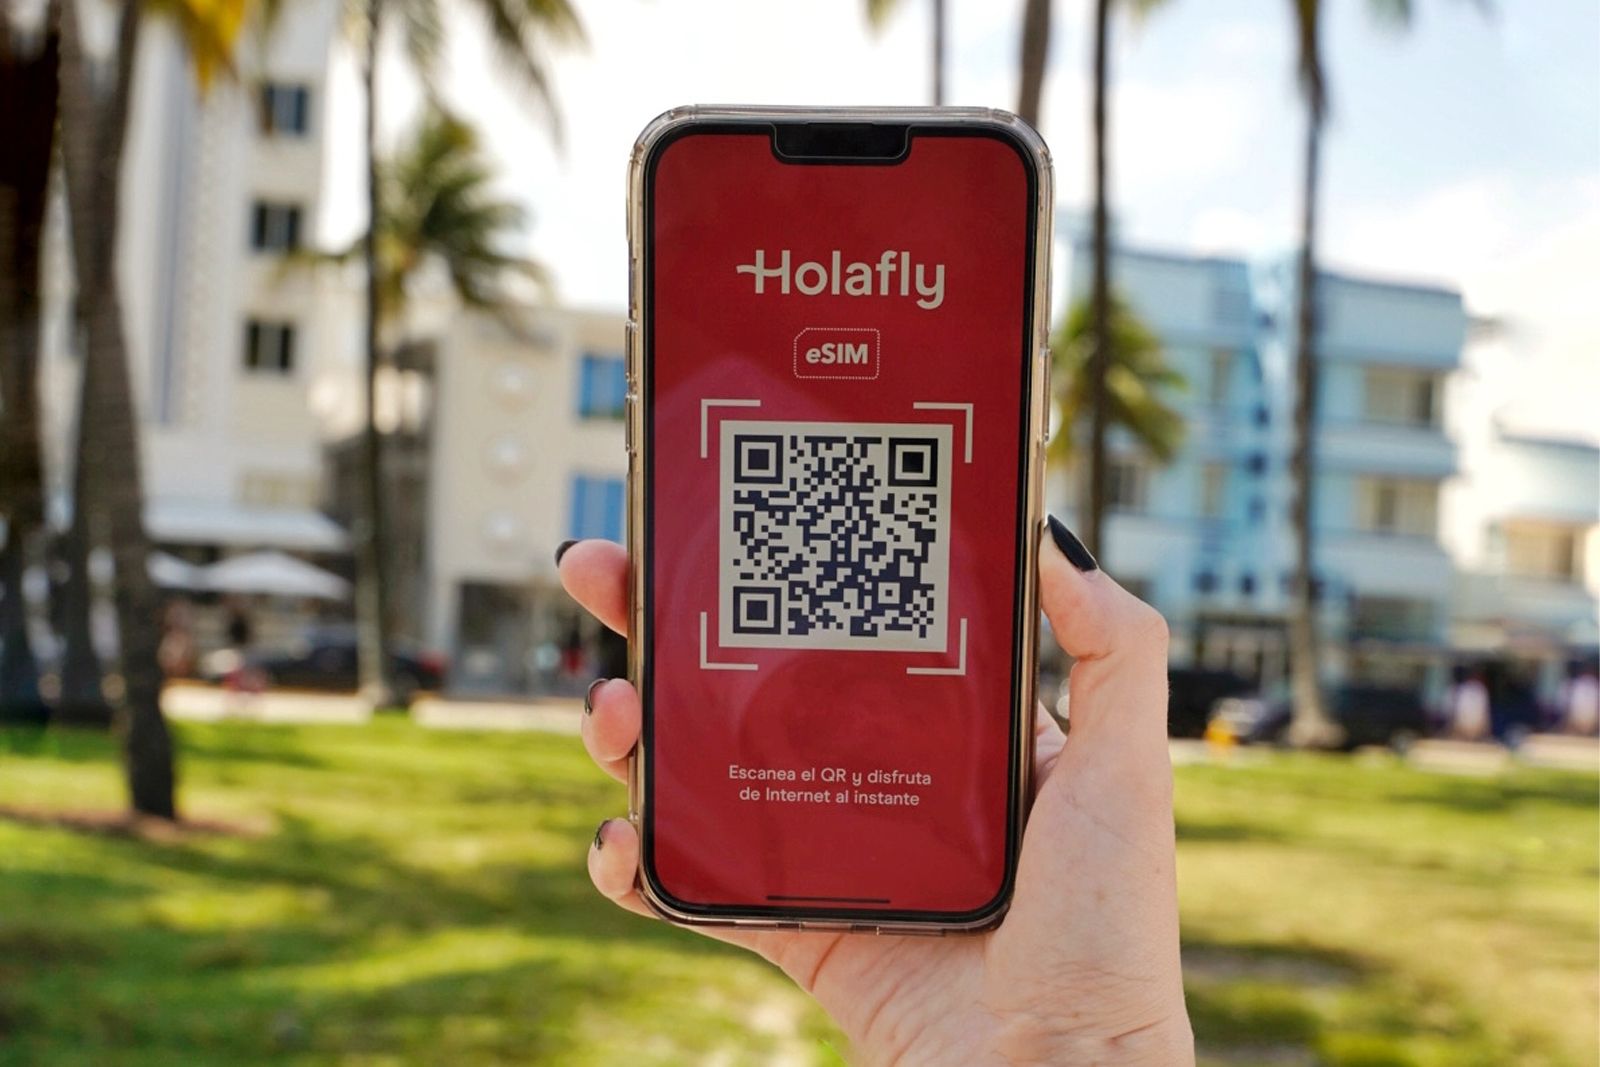 How to use an iPhone in the USA with an Holafly eSIM